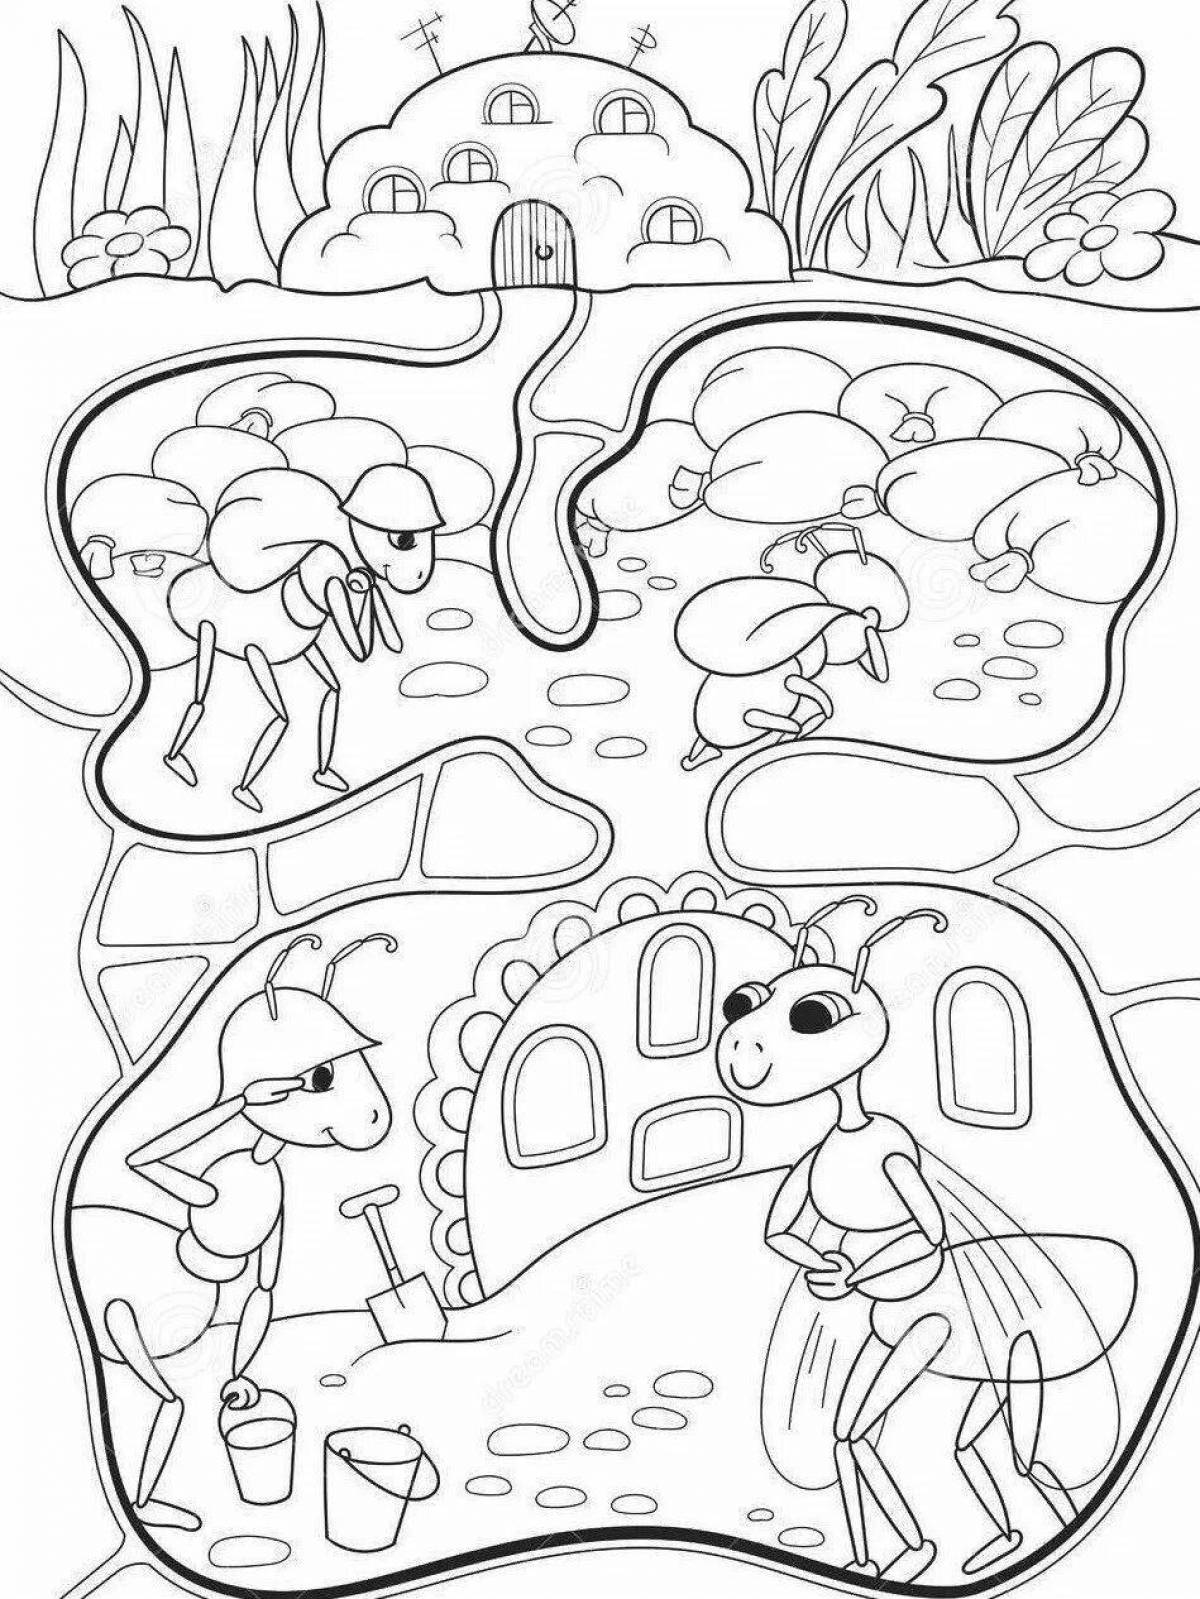 Colorful anthill coloring book